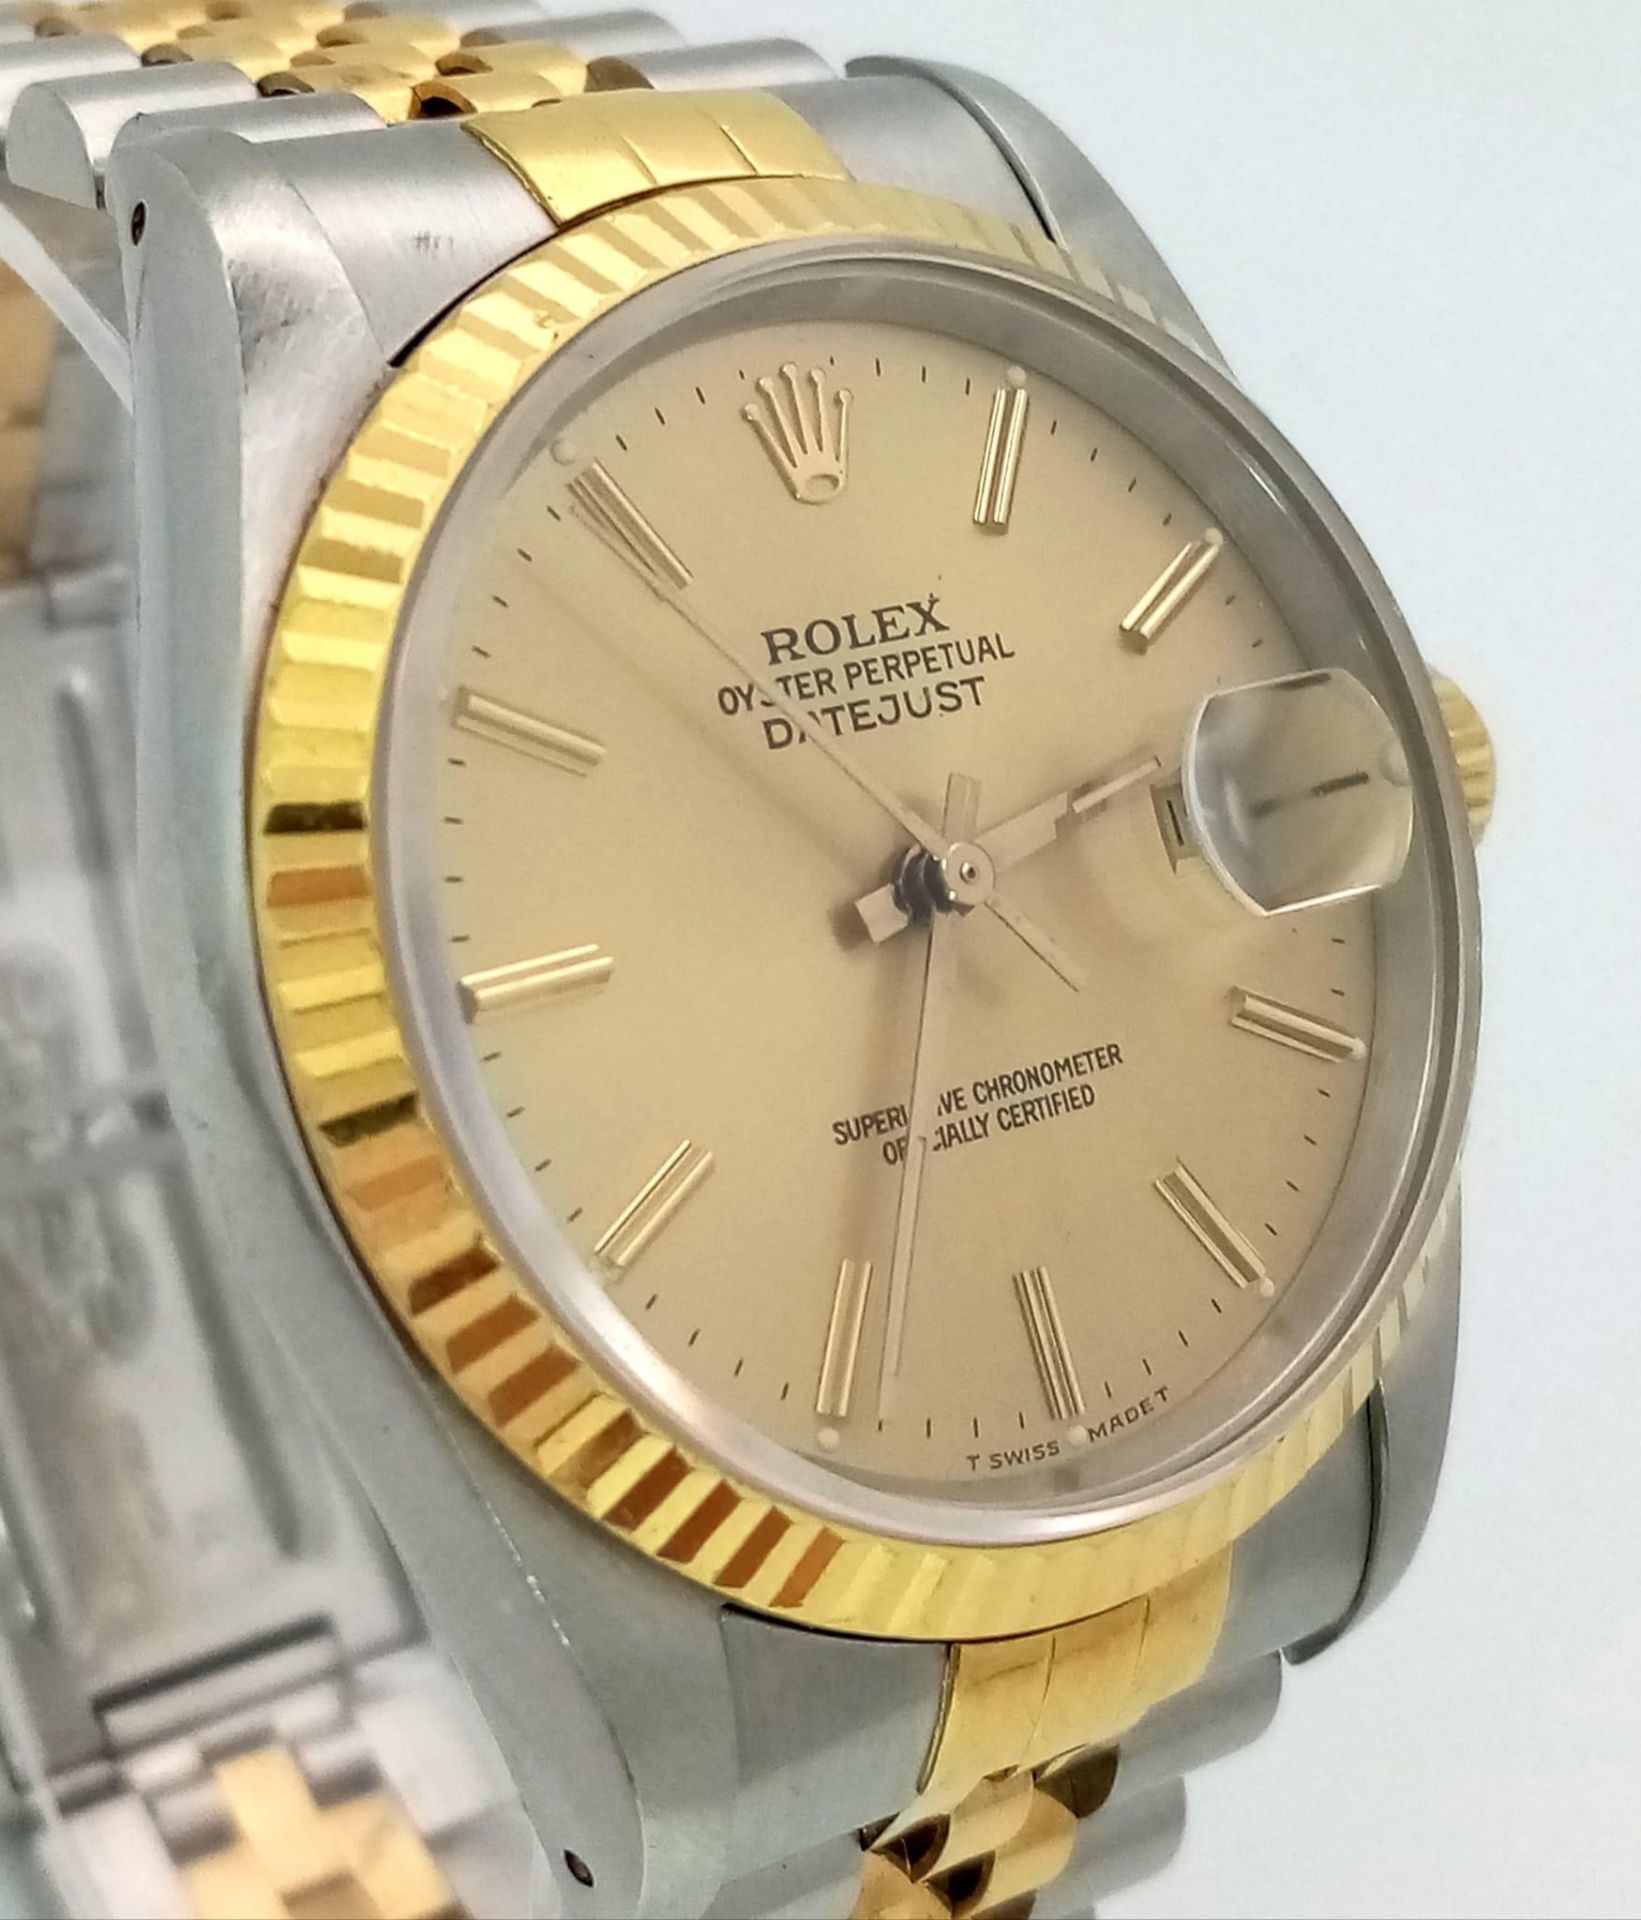 THE CLASSIC GENTS OYSTER PERPETUAL DATEJUST ROLEX WITH GOLDTONE DIAL AND BI-METAL STRAP . A WATCH WE - Bild 3 aus 7